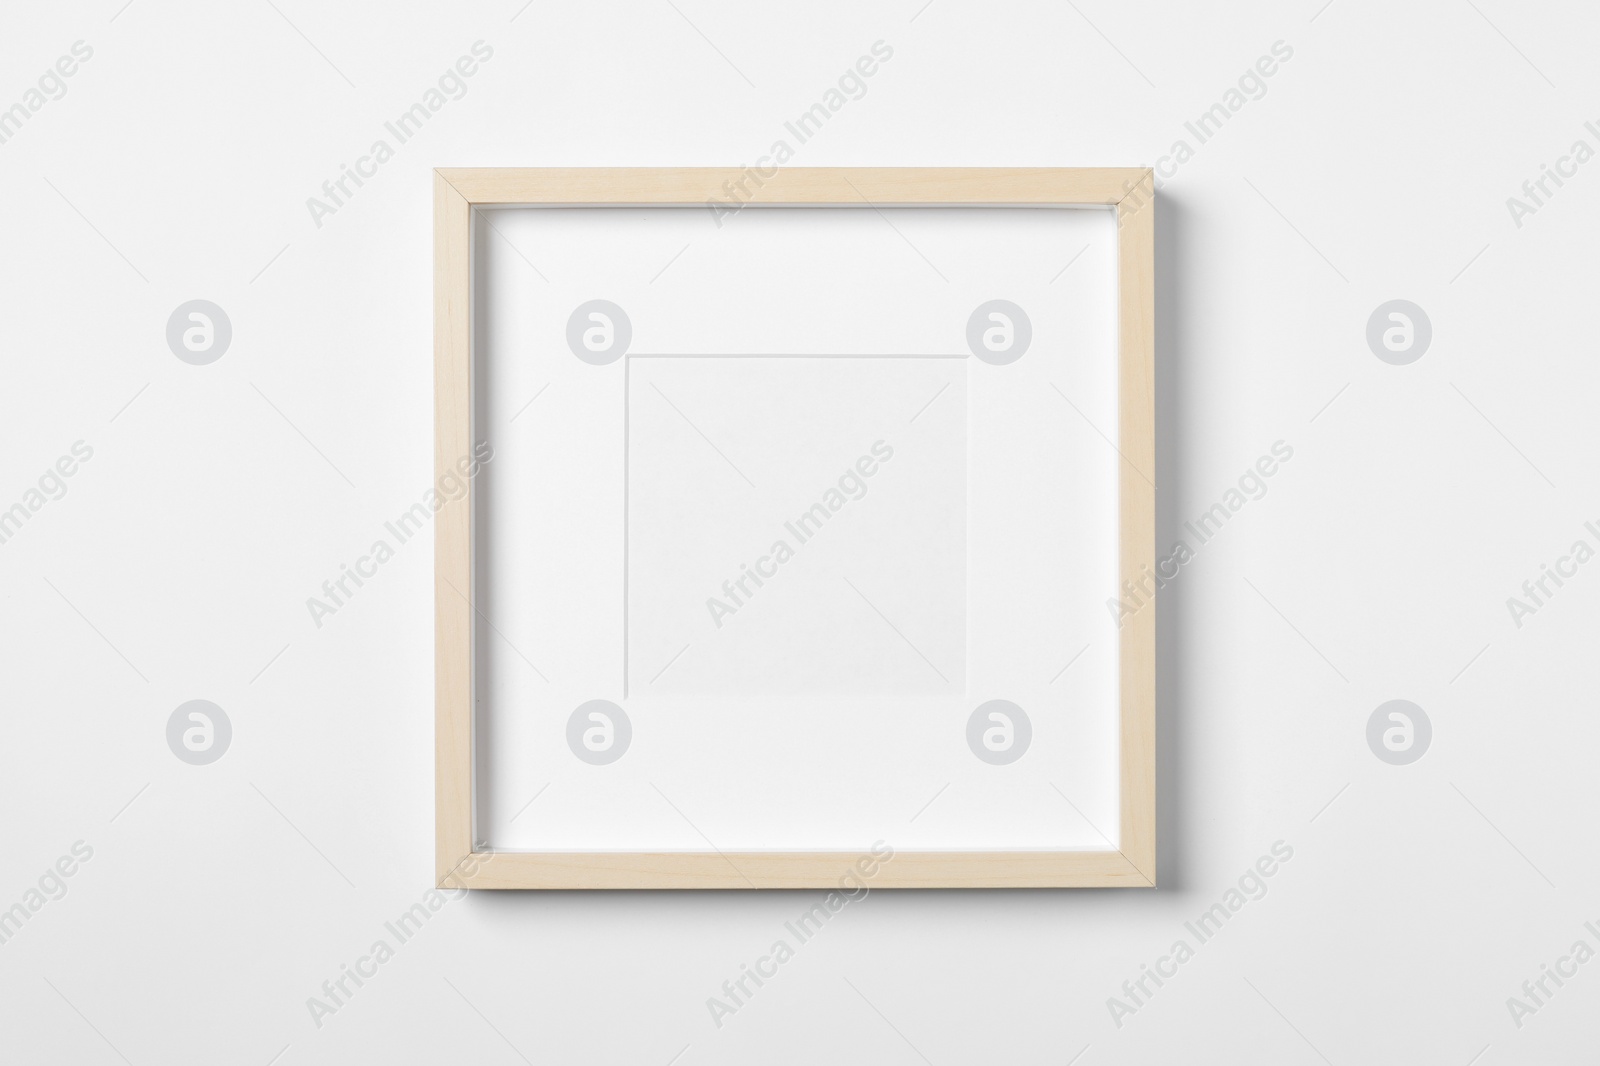 Photo of Empty wooden frame on white background. Mockup for design